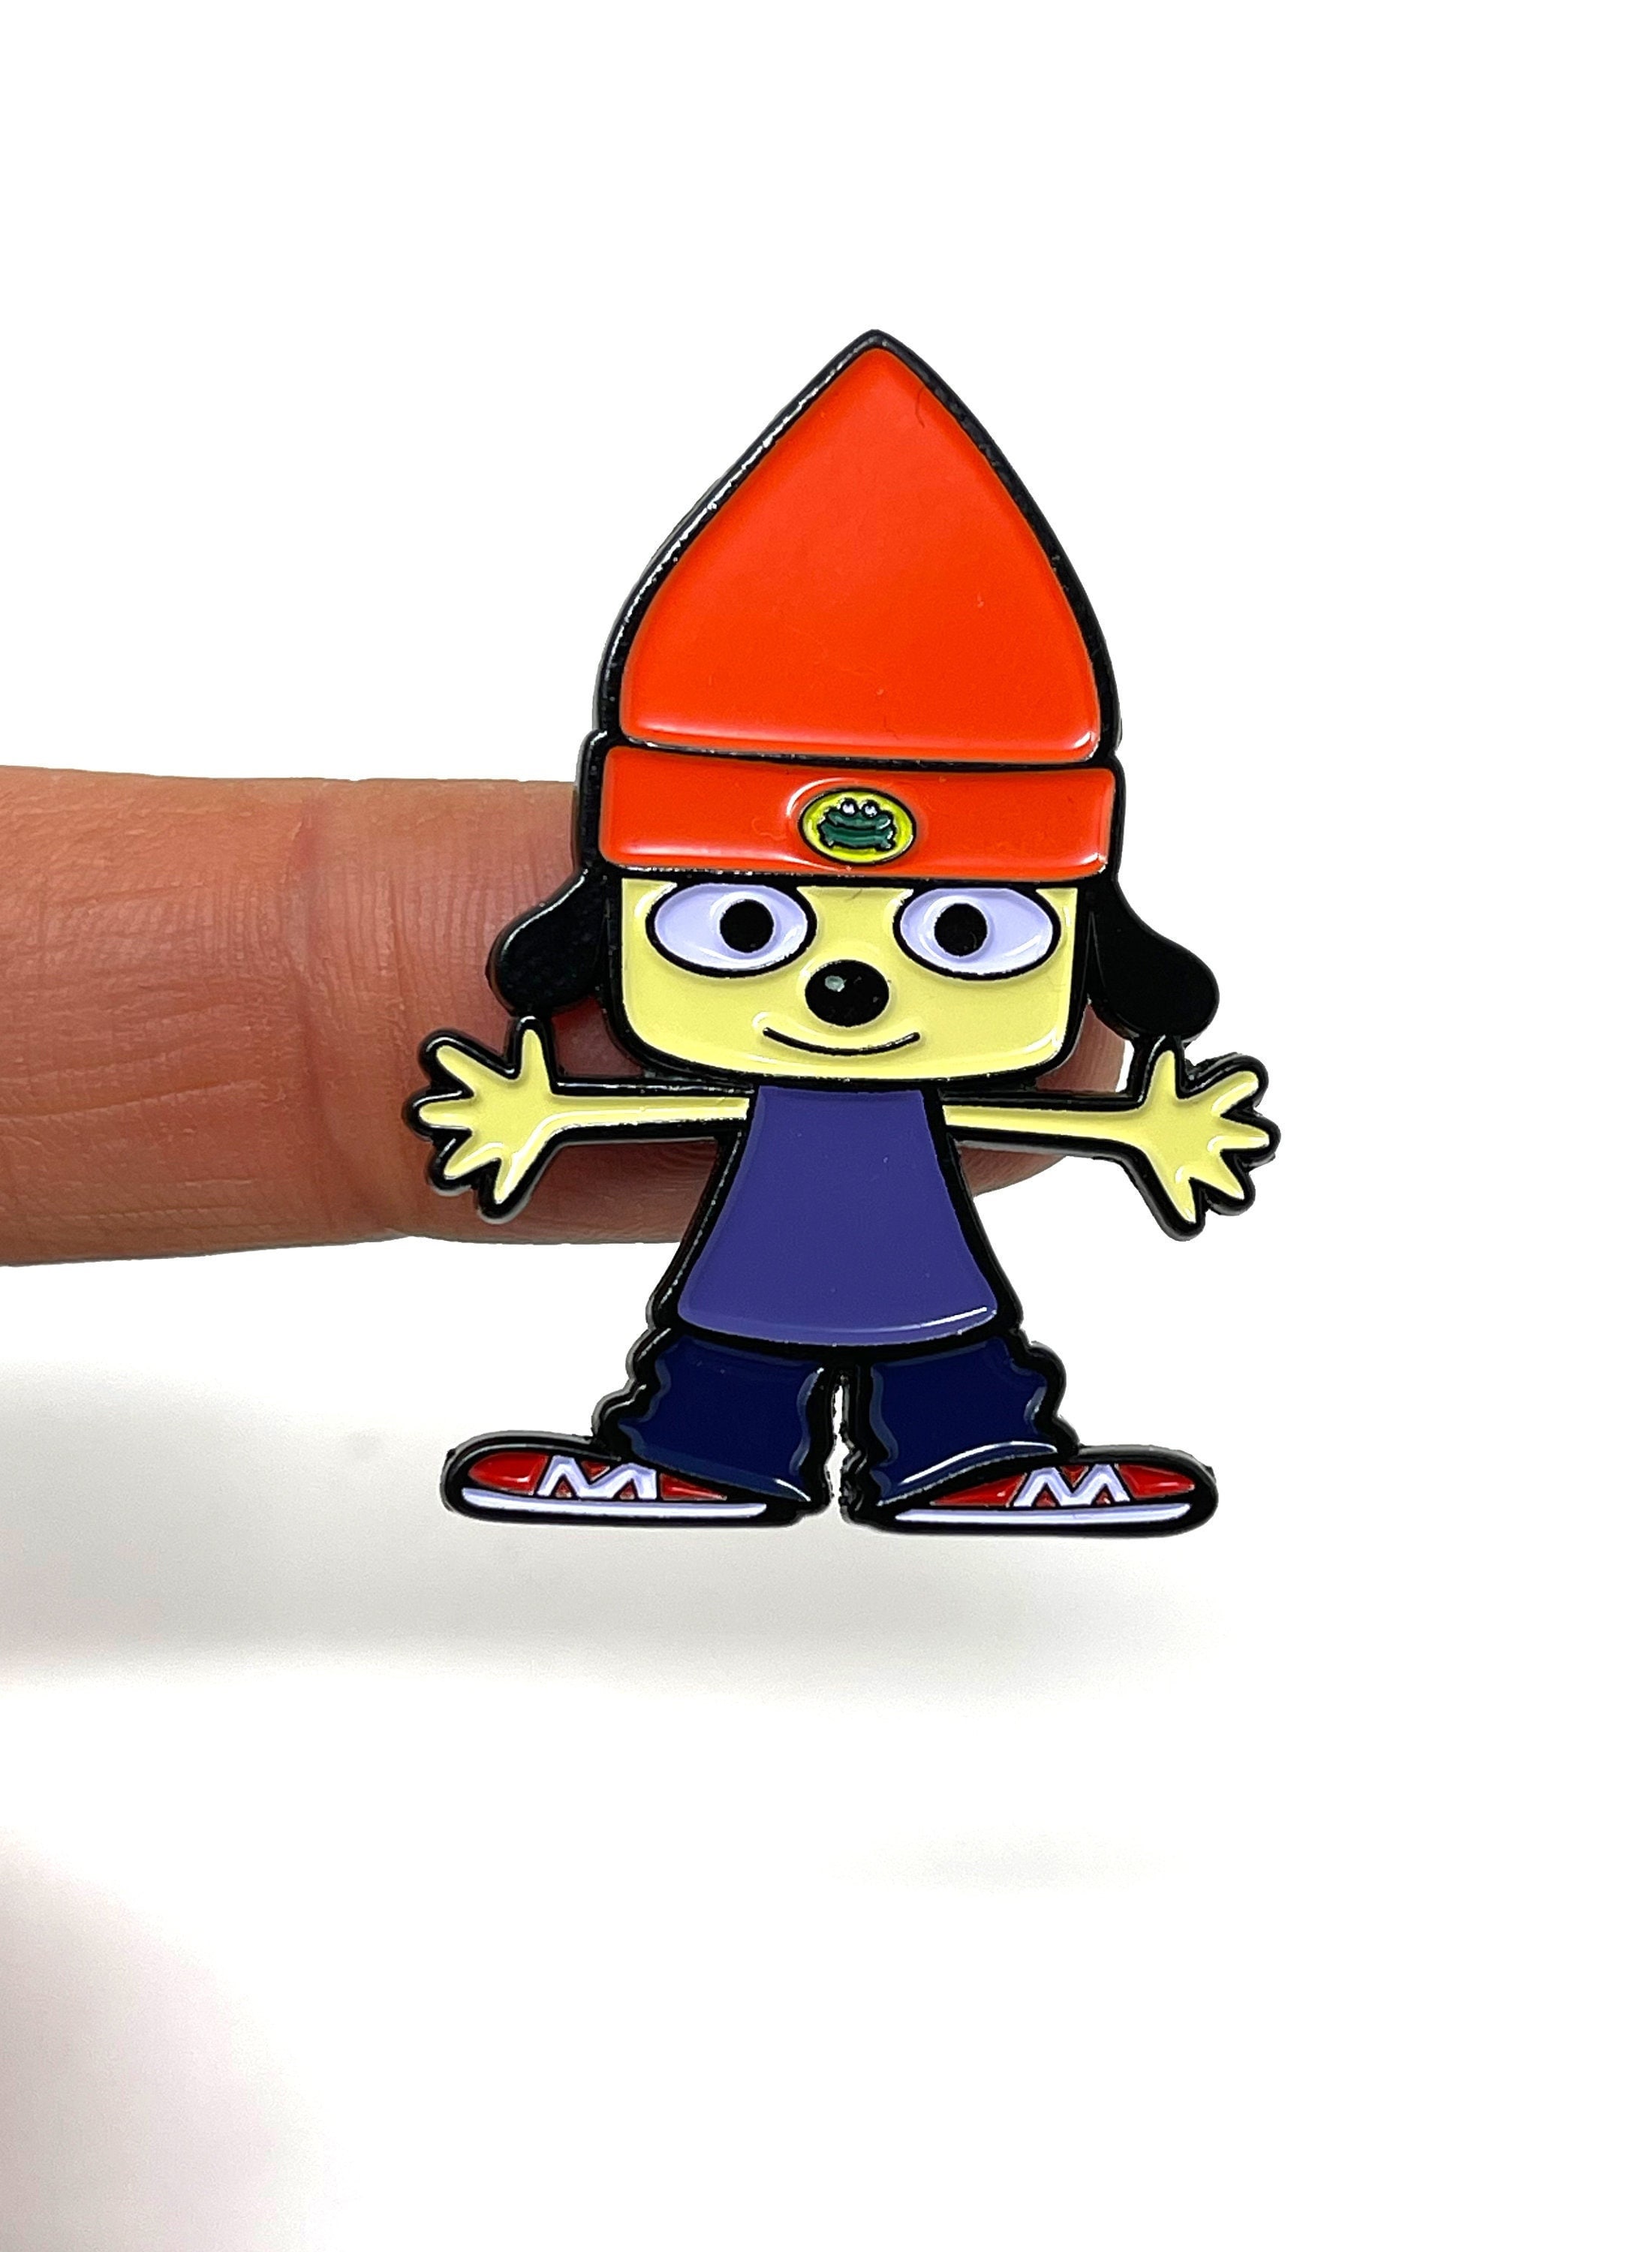 Parappa The Rapper Free Activities online for kids in 4th grade by Flash